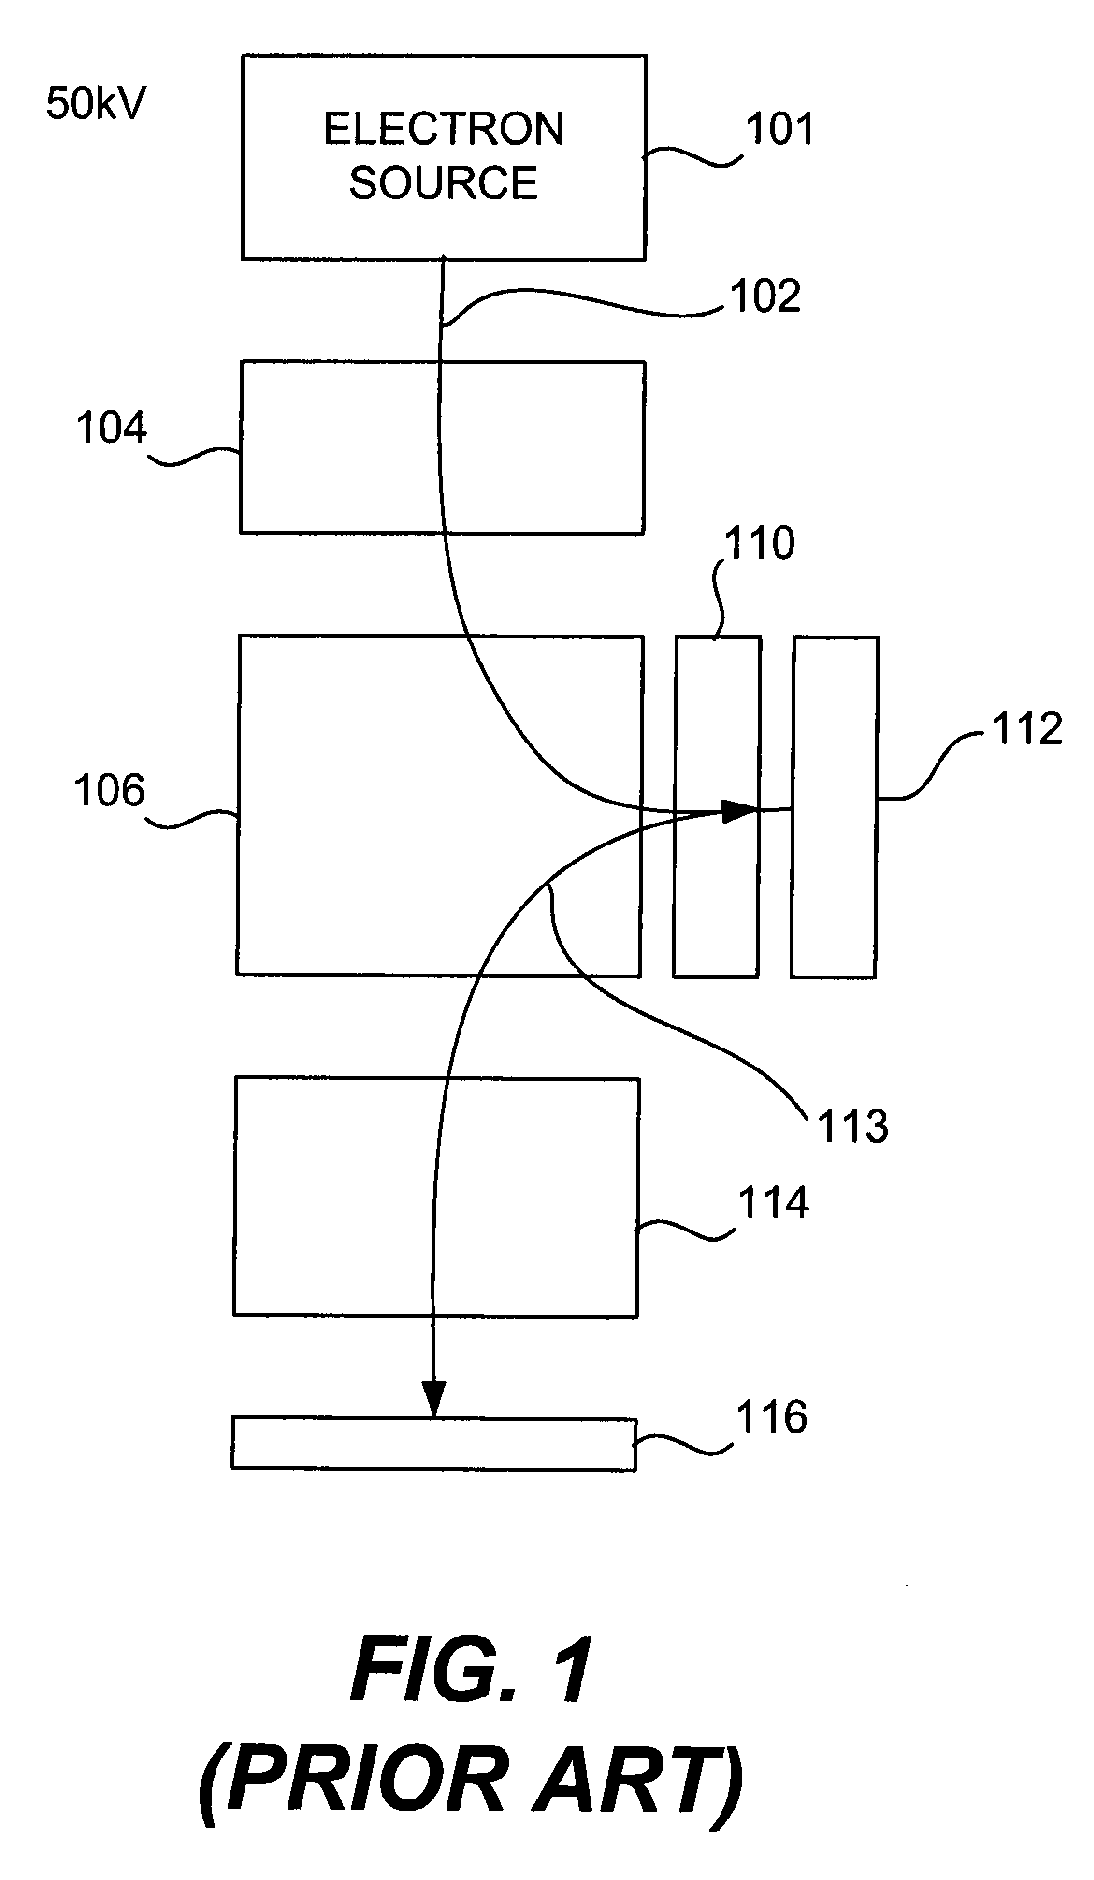 Electron beam lithography method and apparatus using a dynamically controlled photocathode